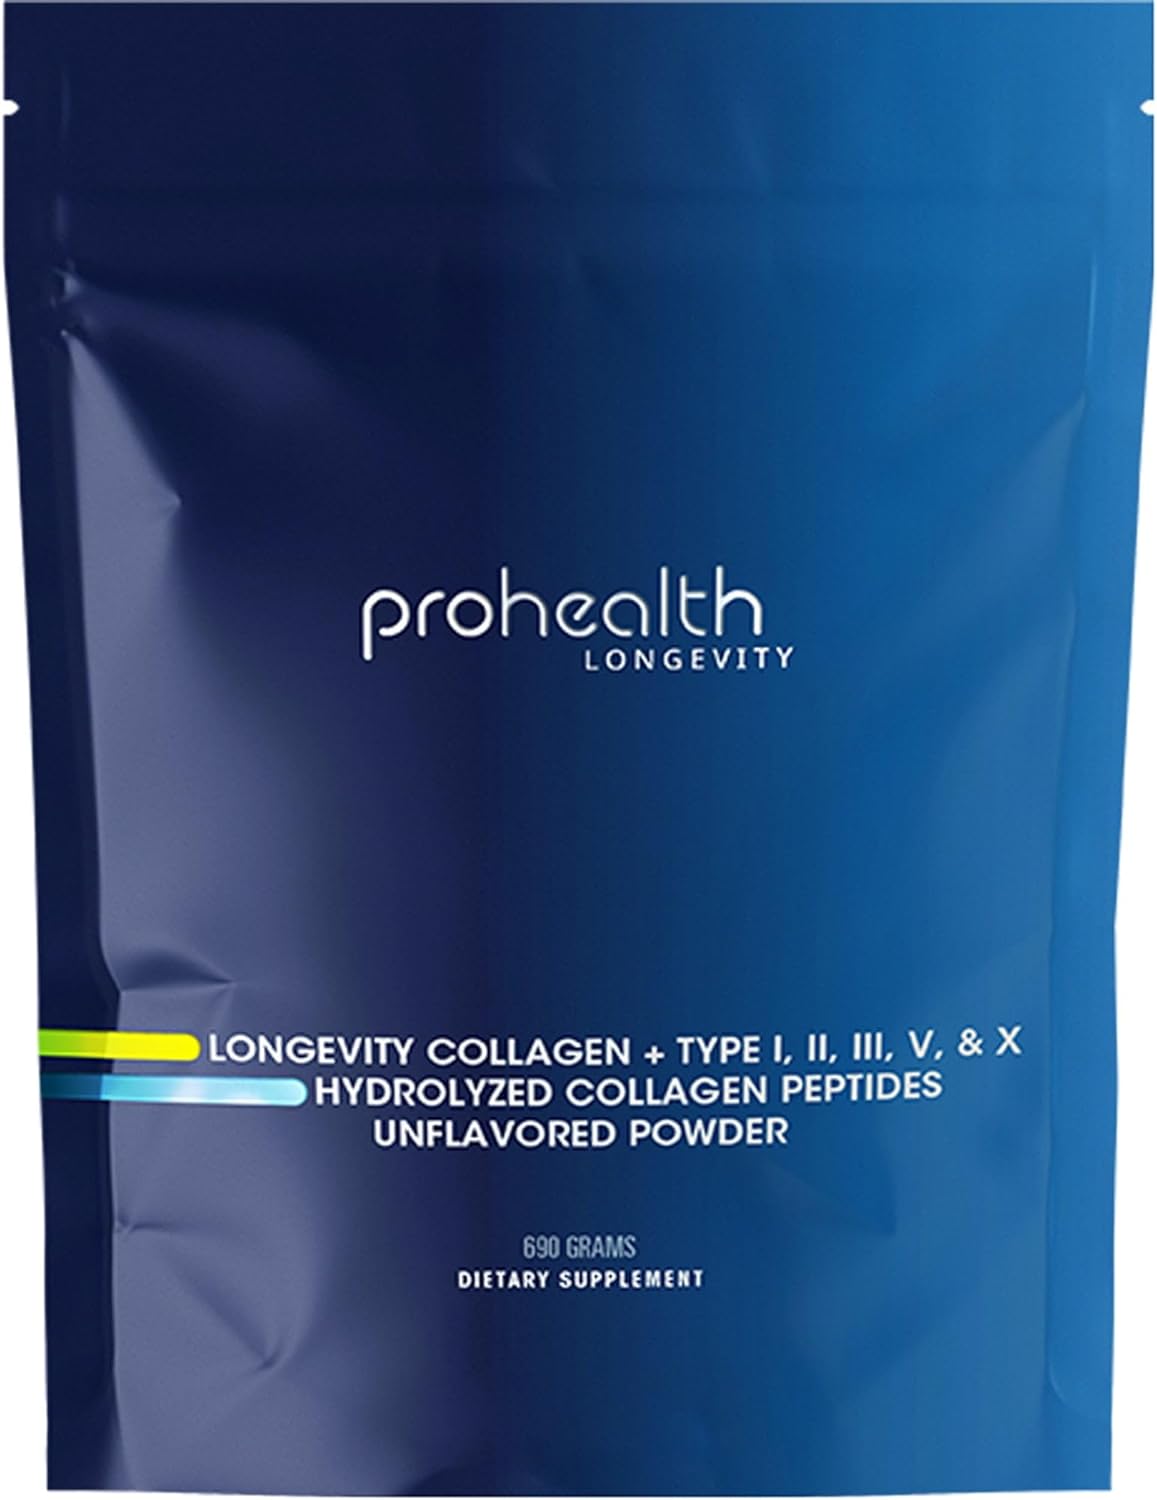 ProHealth Longevity Collagen Peptides Powder - for People Over 40. 20g Multi Collagen. 2g Pro-Collagen. Hyaluronic Acid. Type I, II, III, V, X for Joints, Bones, Hair, Skin, Muscles, Gut - 30 Servings